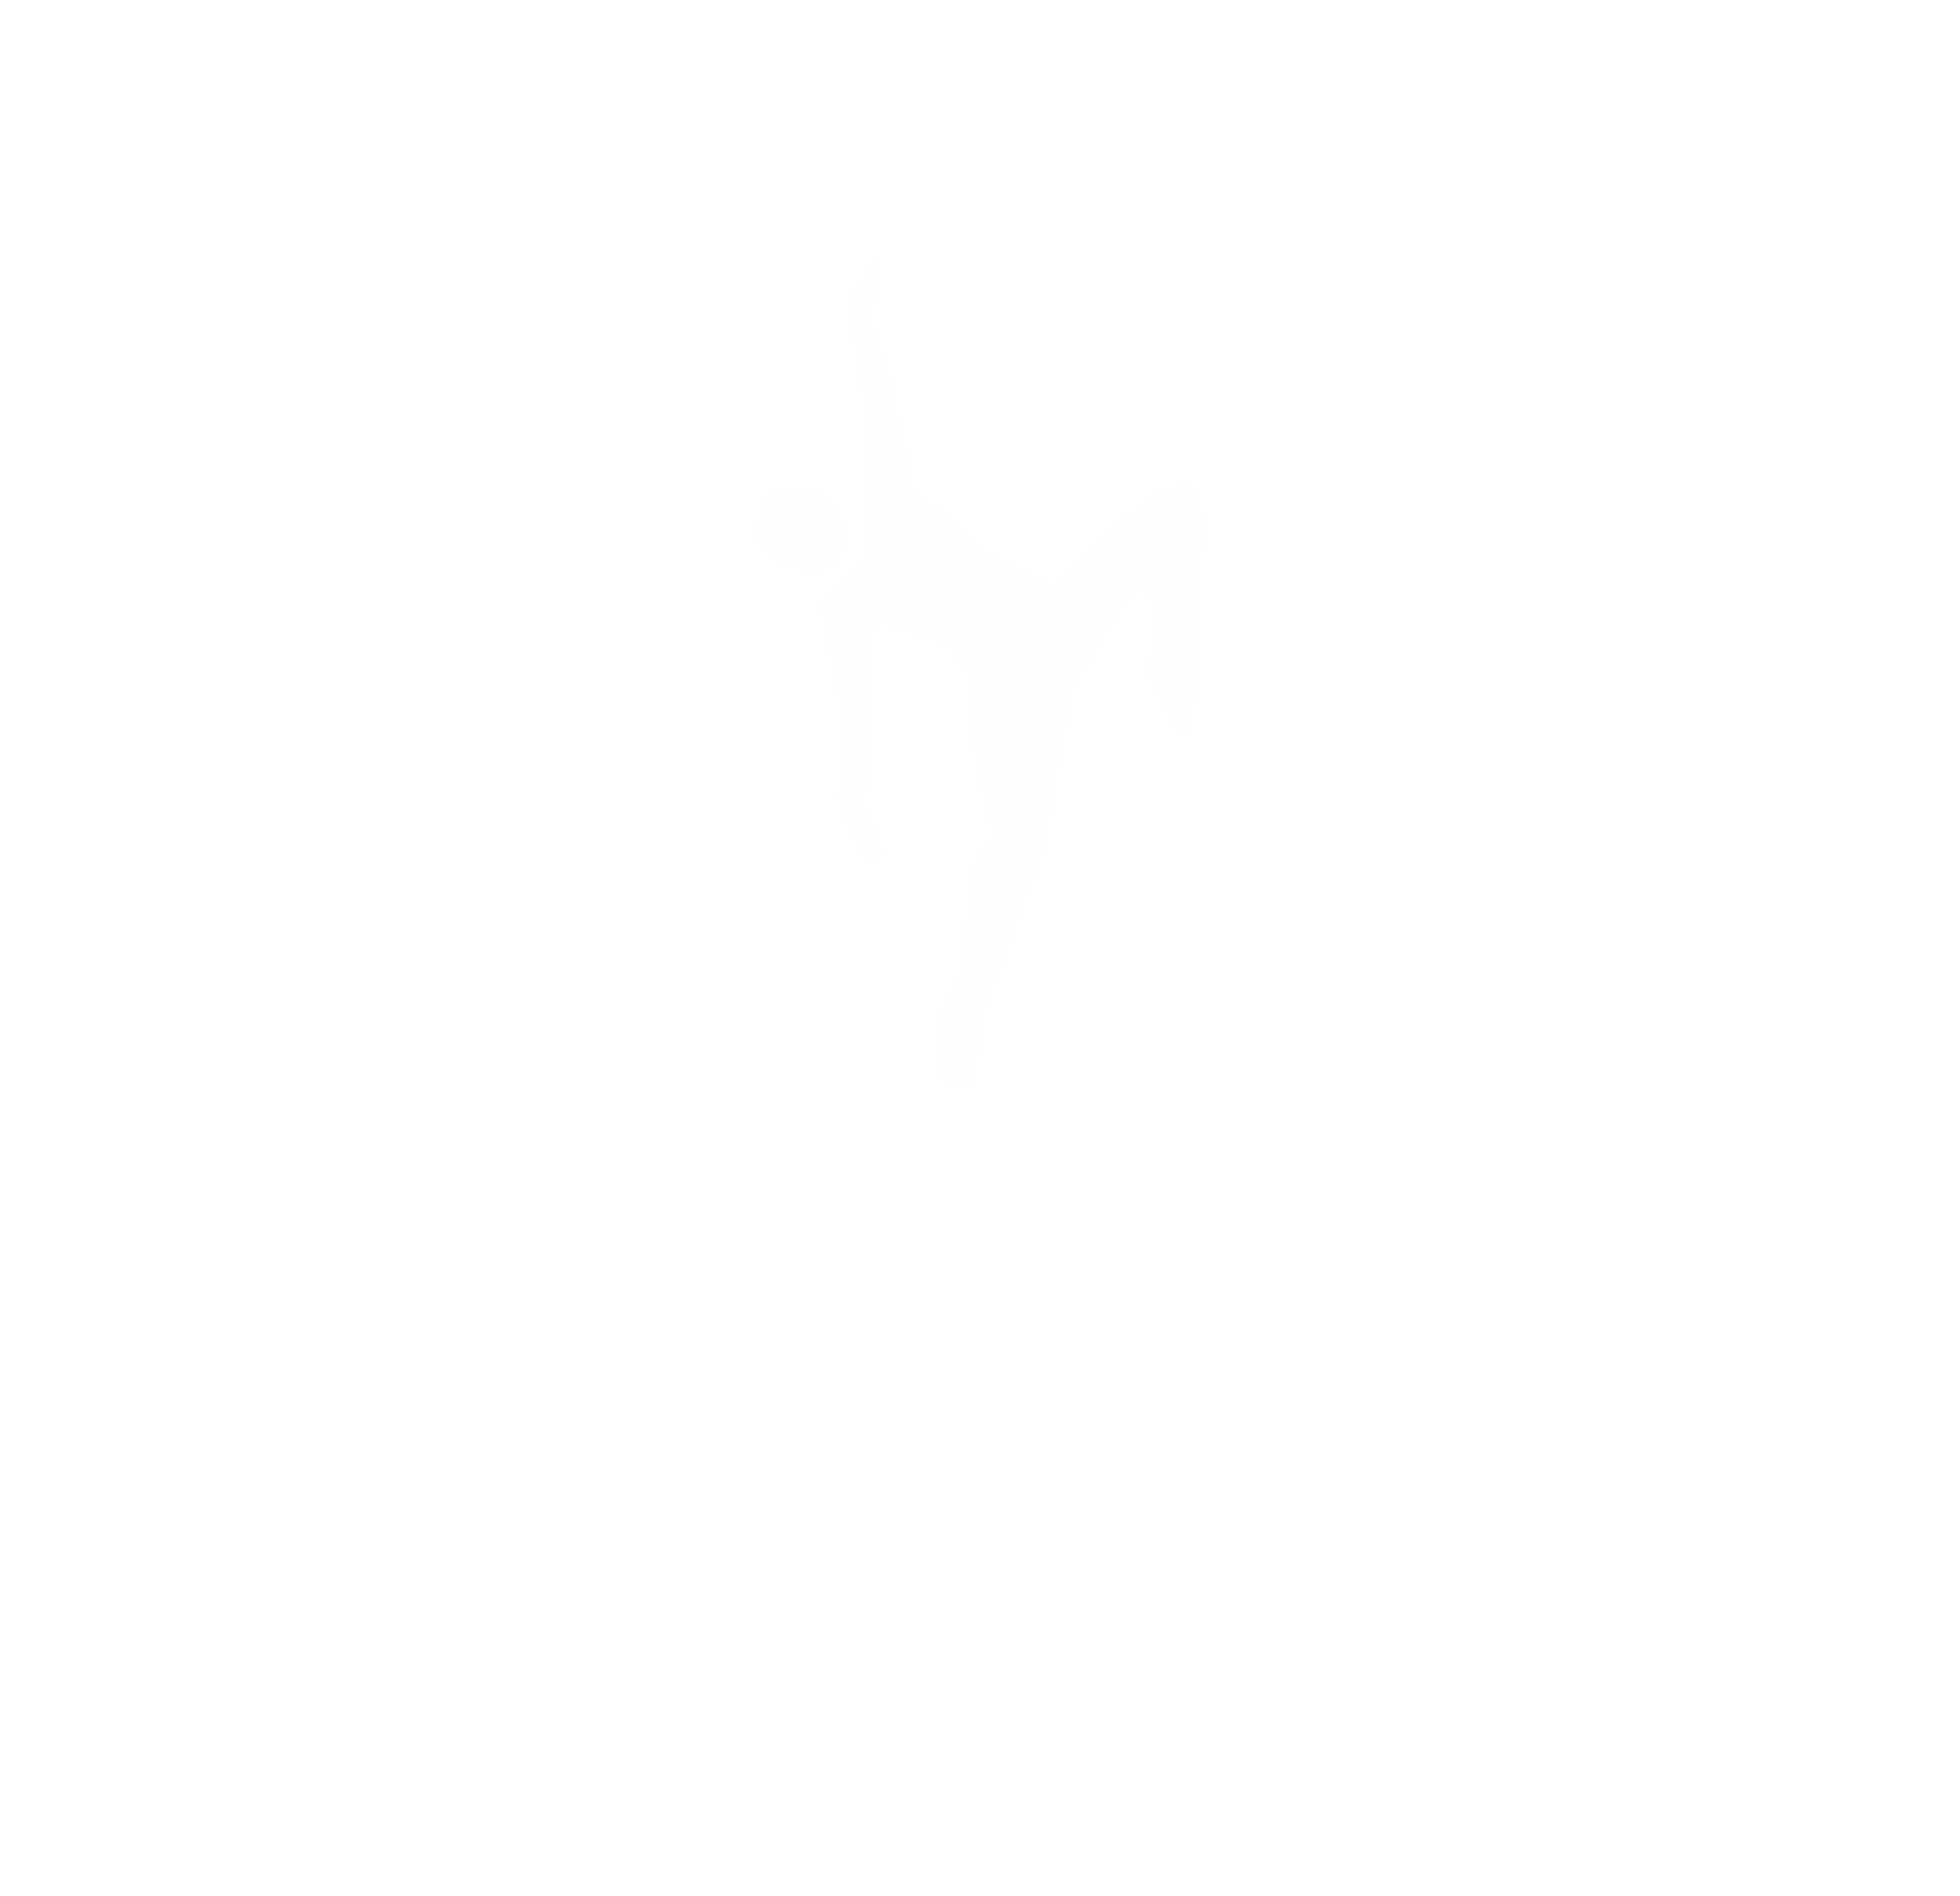 Pat Catterson 